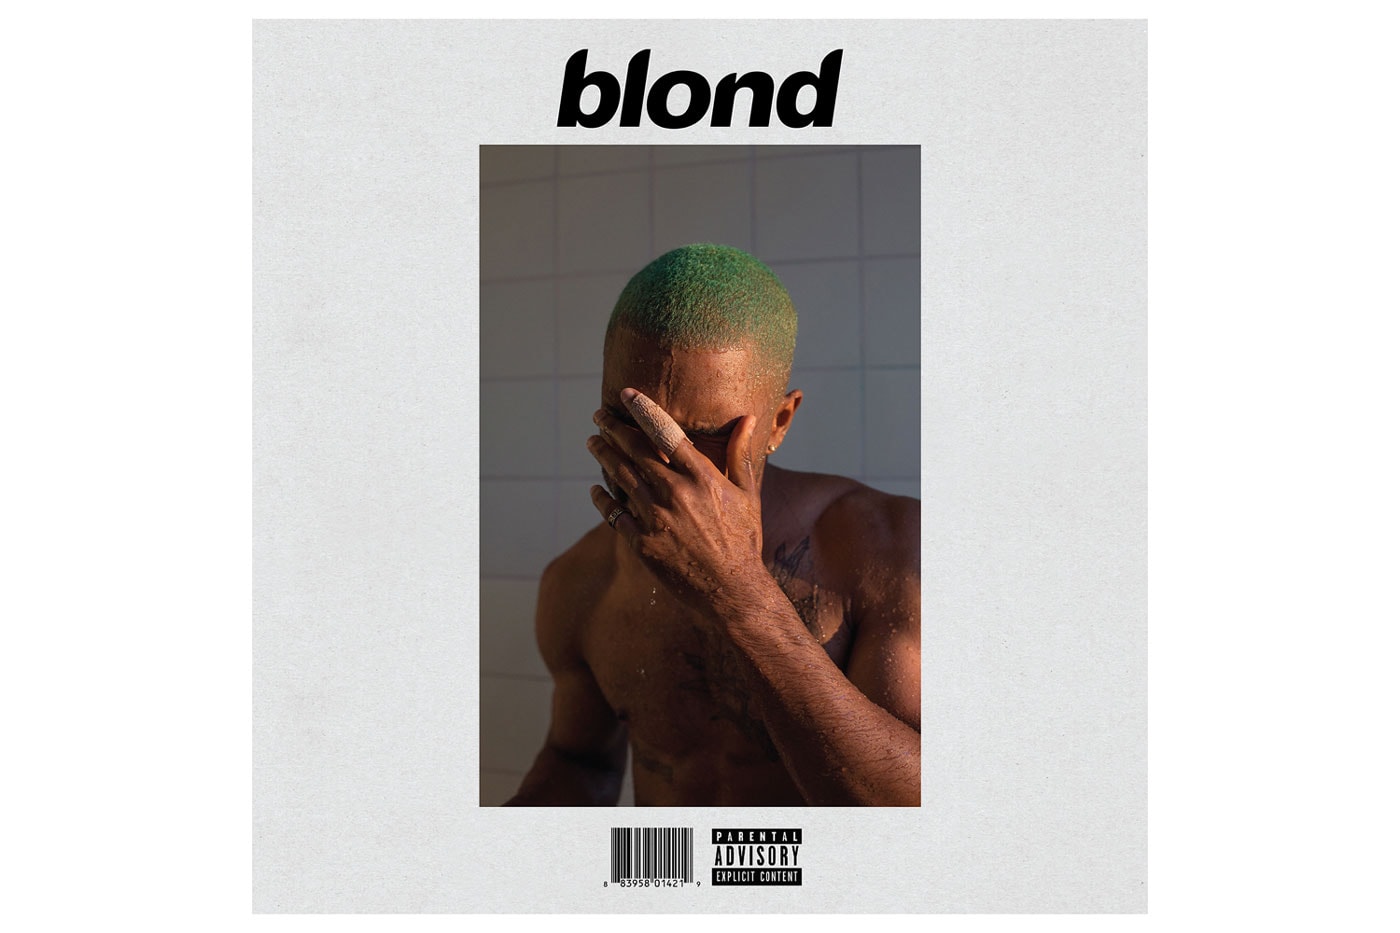 Frank Ocean's 'Blonde' Album Now Available on TIDAL